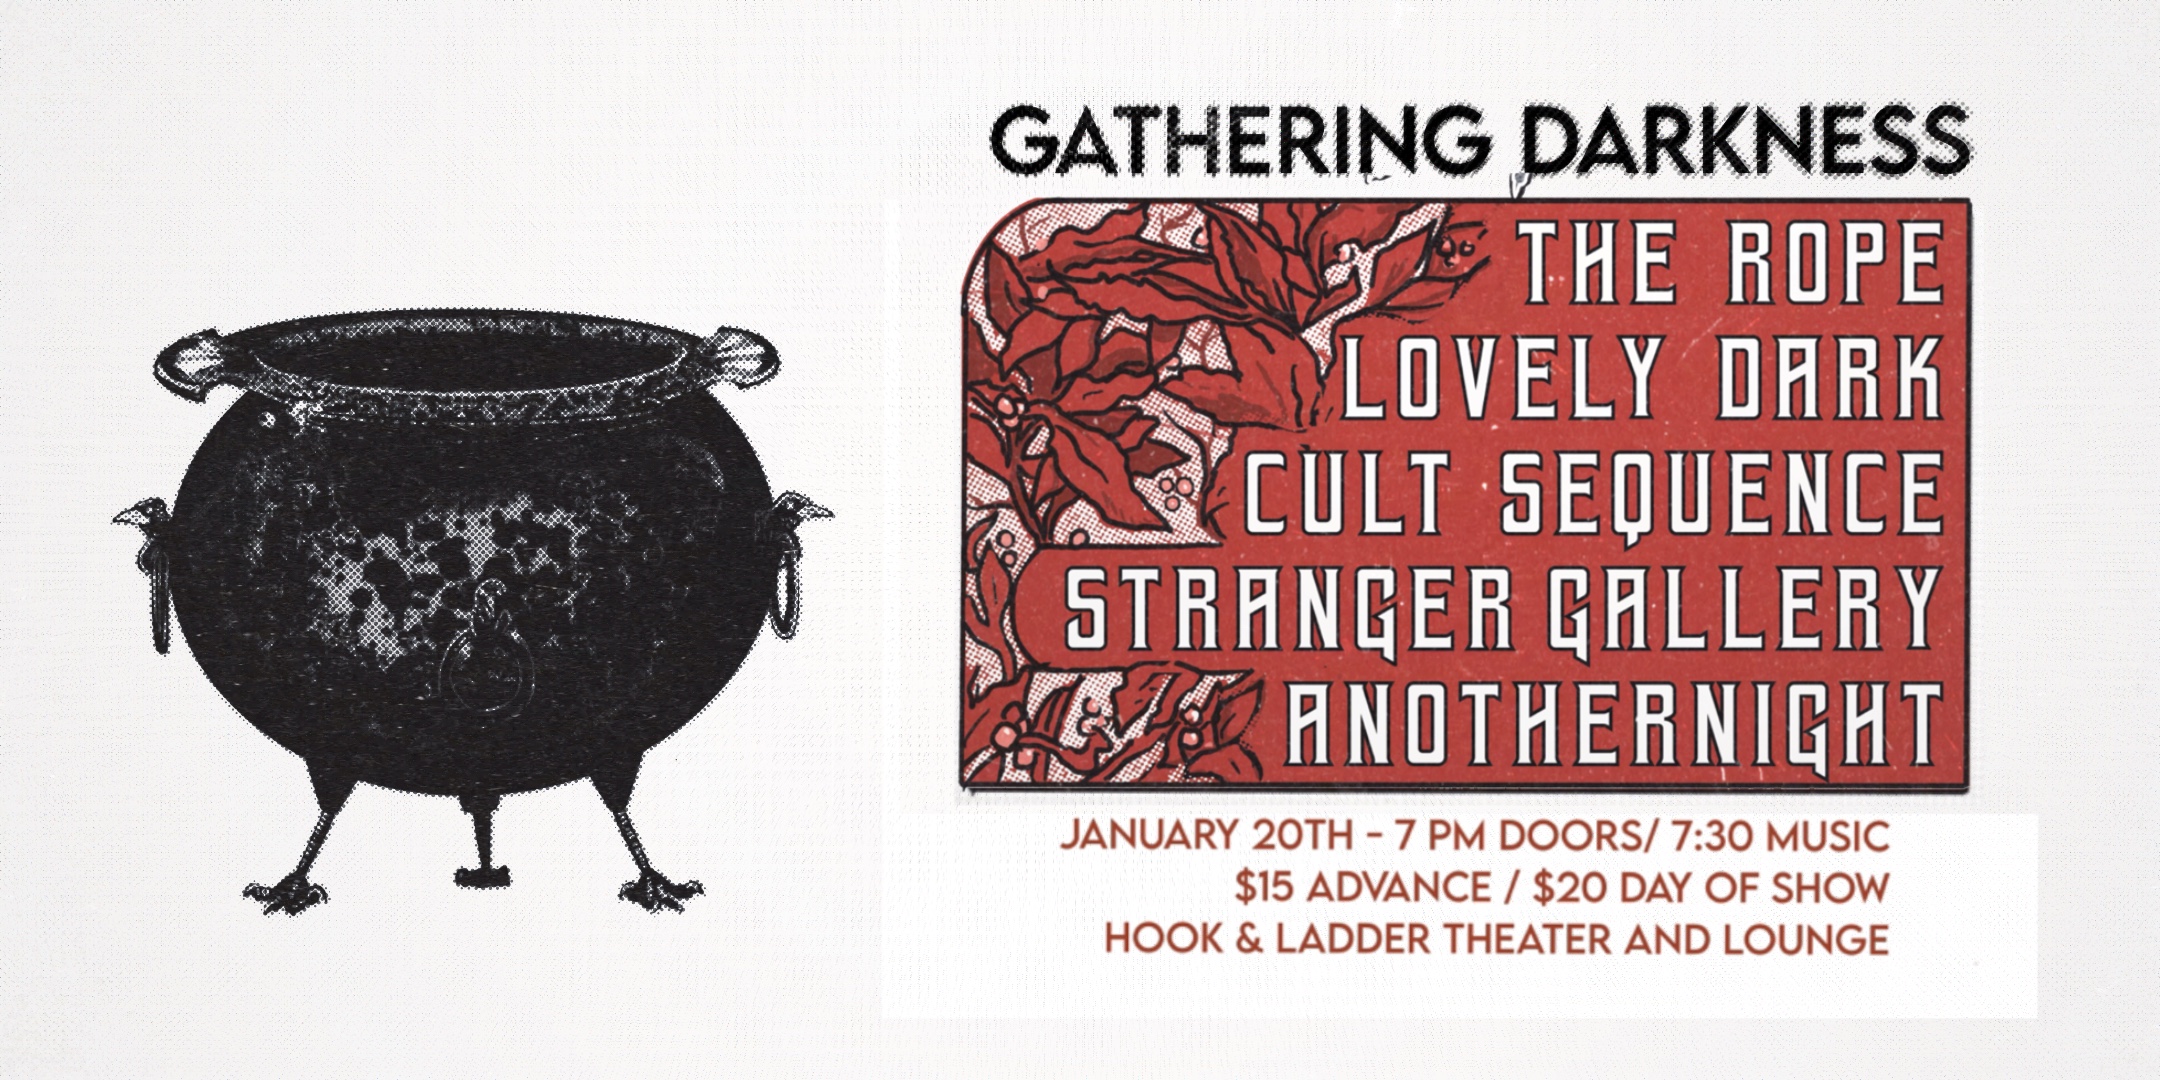 Gathering Darkness The Rope | Lovely Dark | Cult Sequence | Stranger Gallery | Anothernight Saturday, January 20 The Hook and Ladder Theater Doors 7:00pm :: Music 7:30pm :: 21+ $15 ADV / $20 DOS